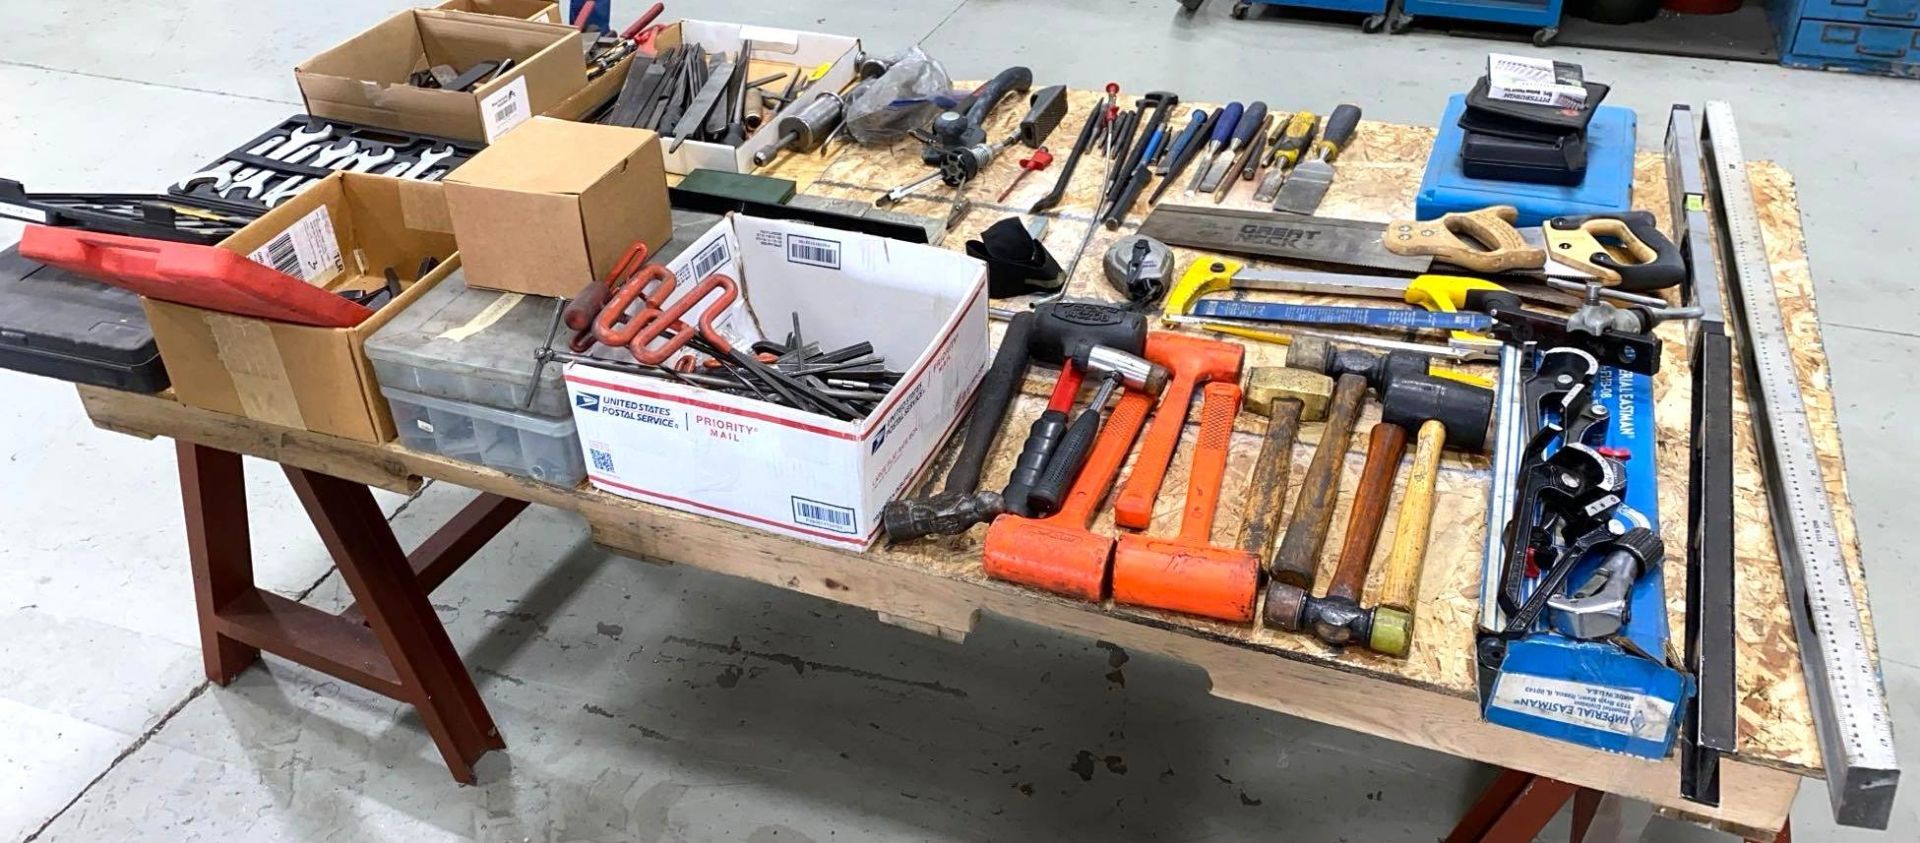 BIG LOT of Hand Tools, Wrenches, Files, Sockets, Levels, Etc. - Image 2 of 7